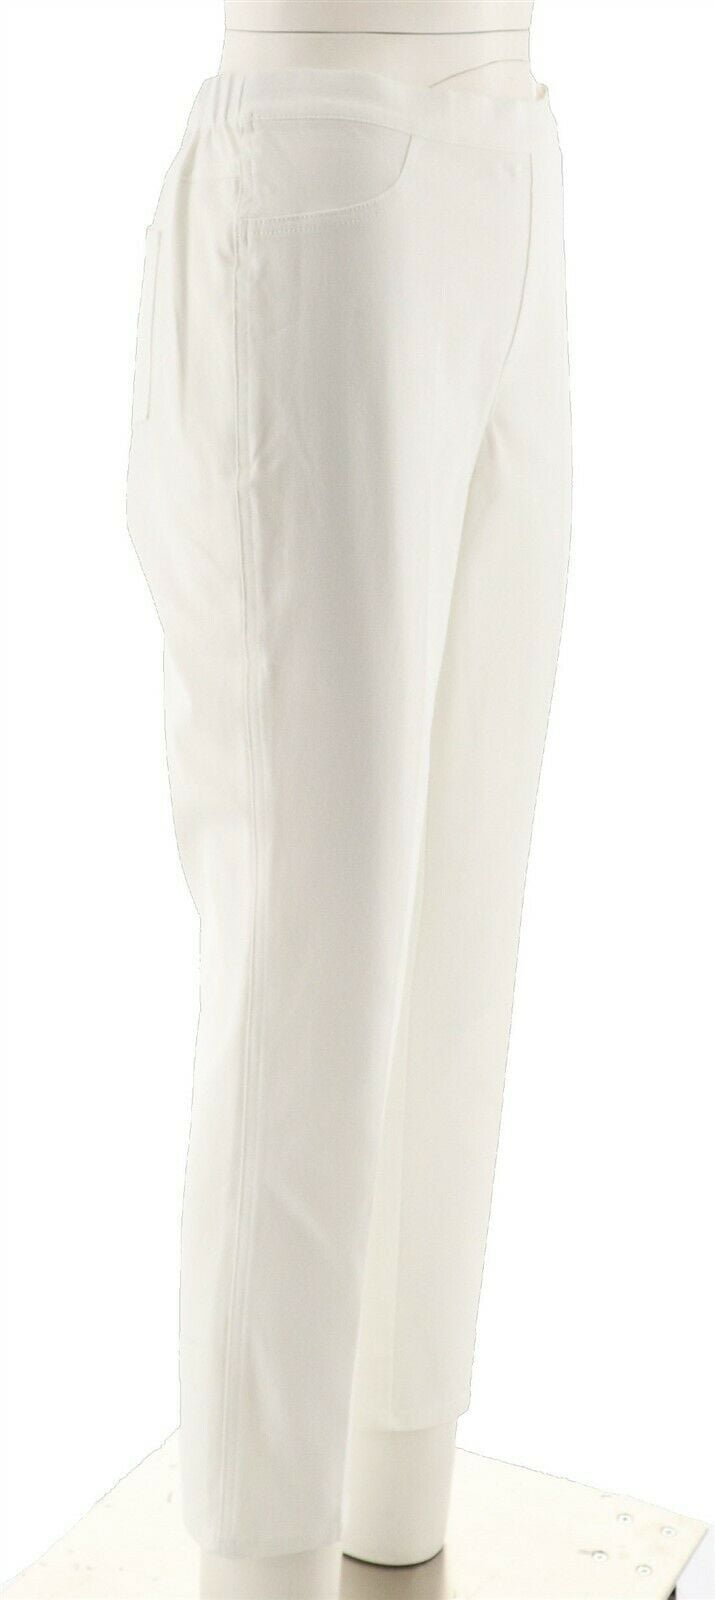 Isaac Mizrahi 24 7 Stretch Pull-On Ankle Pants Cadet Navy 12 NEW A220443